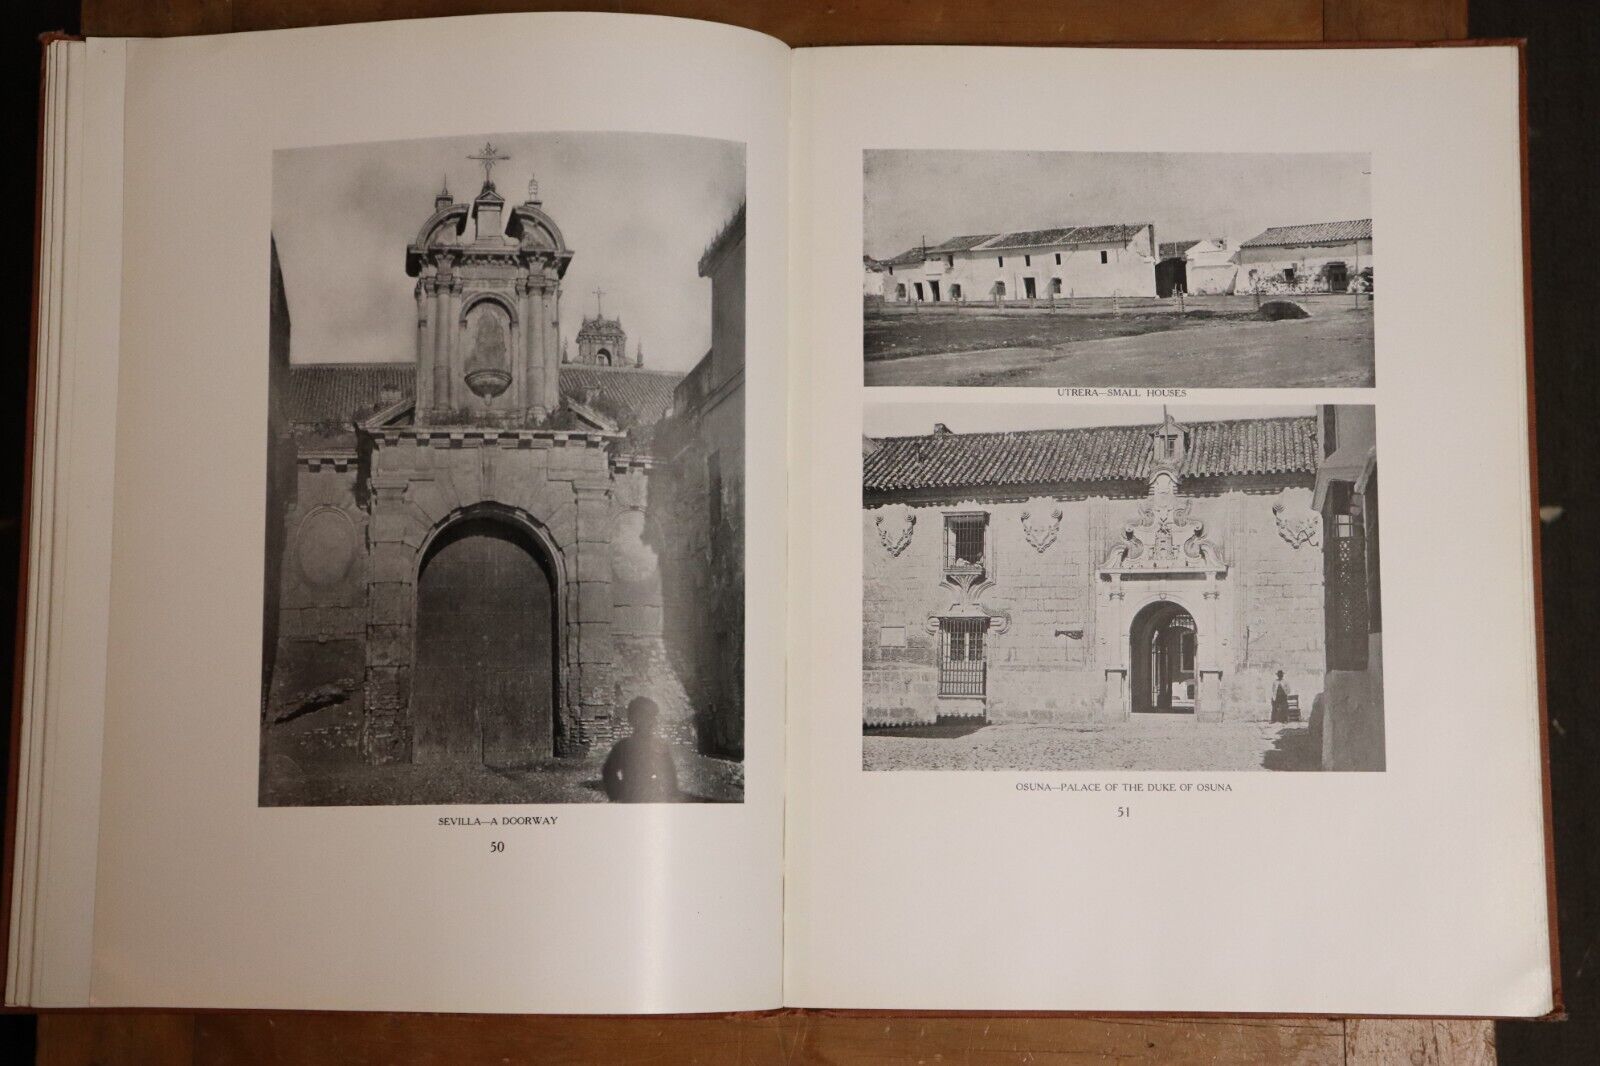 The Minor Ecclesiastical Domestic & Garden Architecture Of Southern Spain - 1917